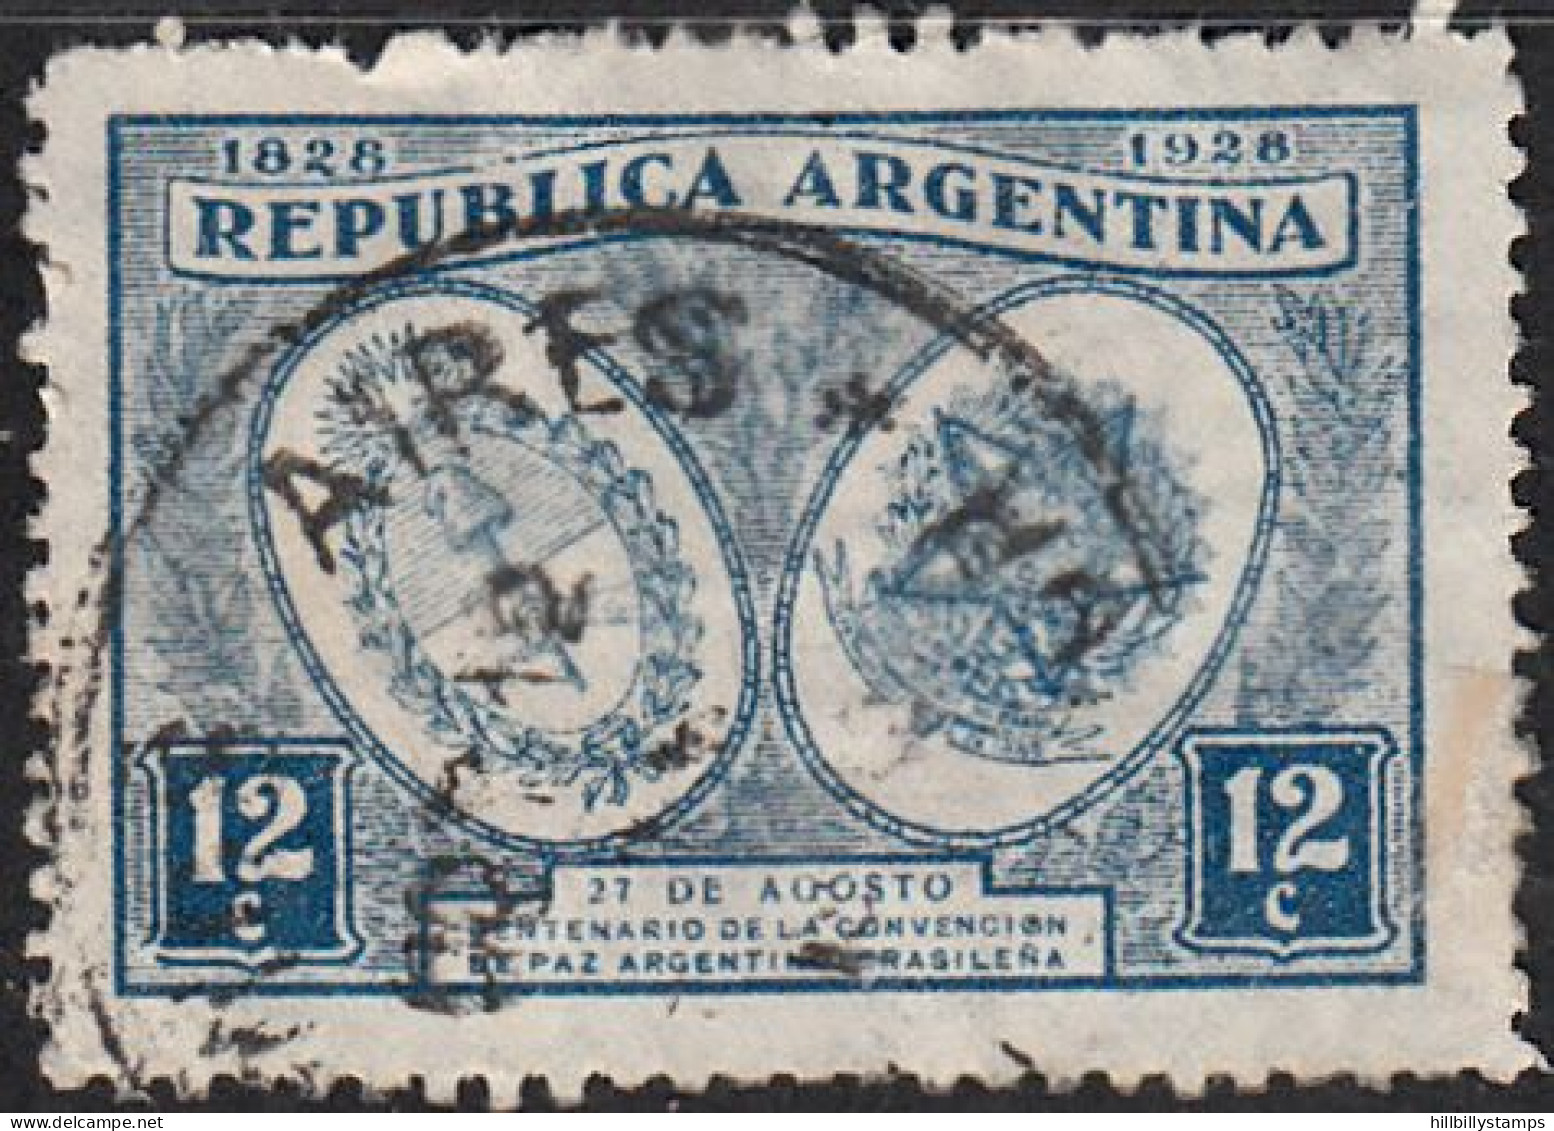 ARGENTINA   SCOTT NO 370  USED  YEAR 1928 - Used Stamps